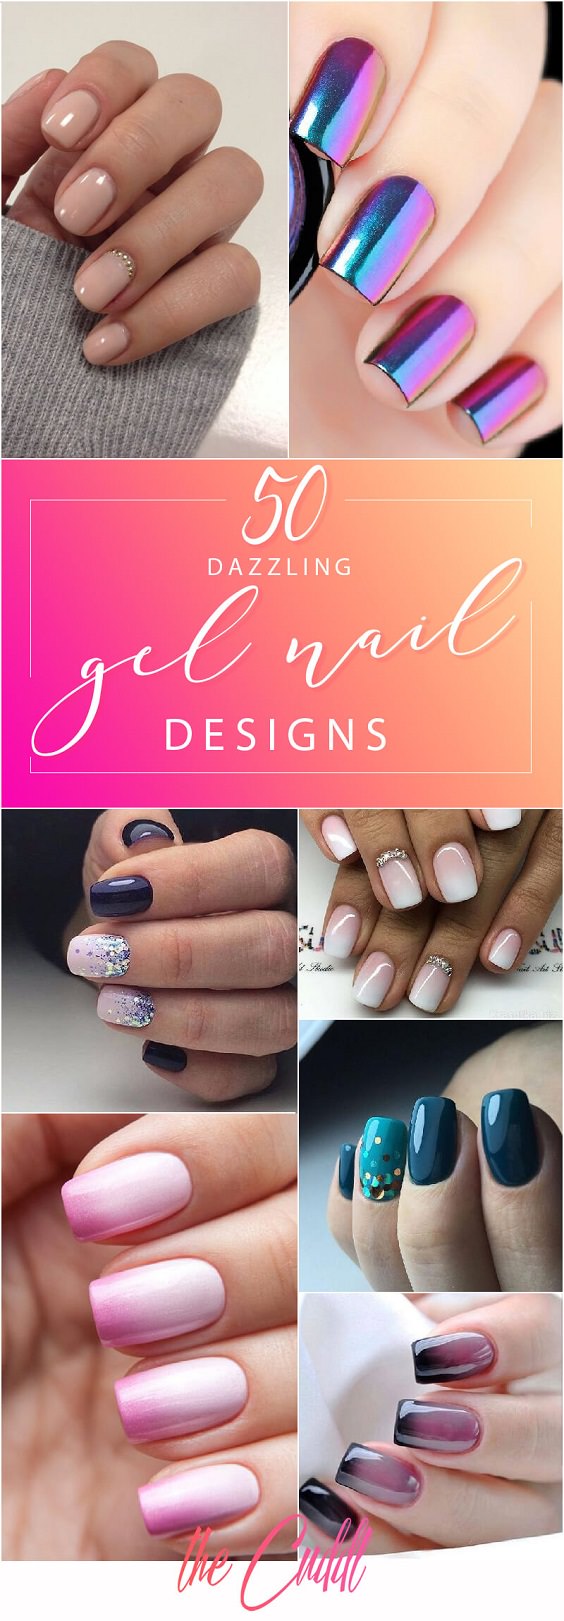 Here 50 Dazzling Ways to Create Gel Nail Designs to Delight.